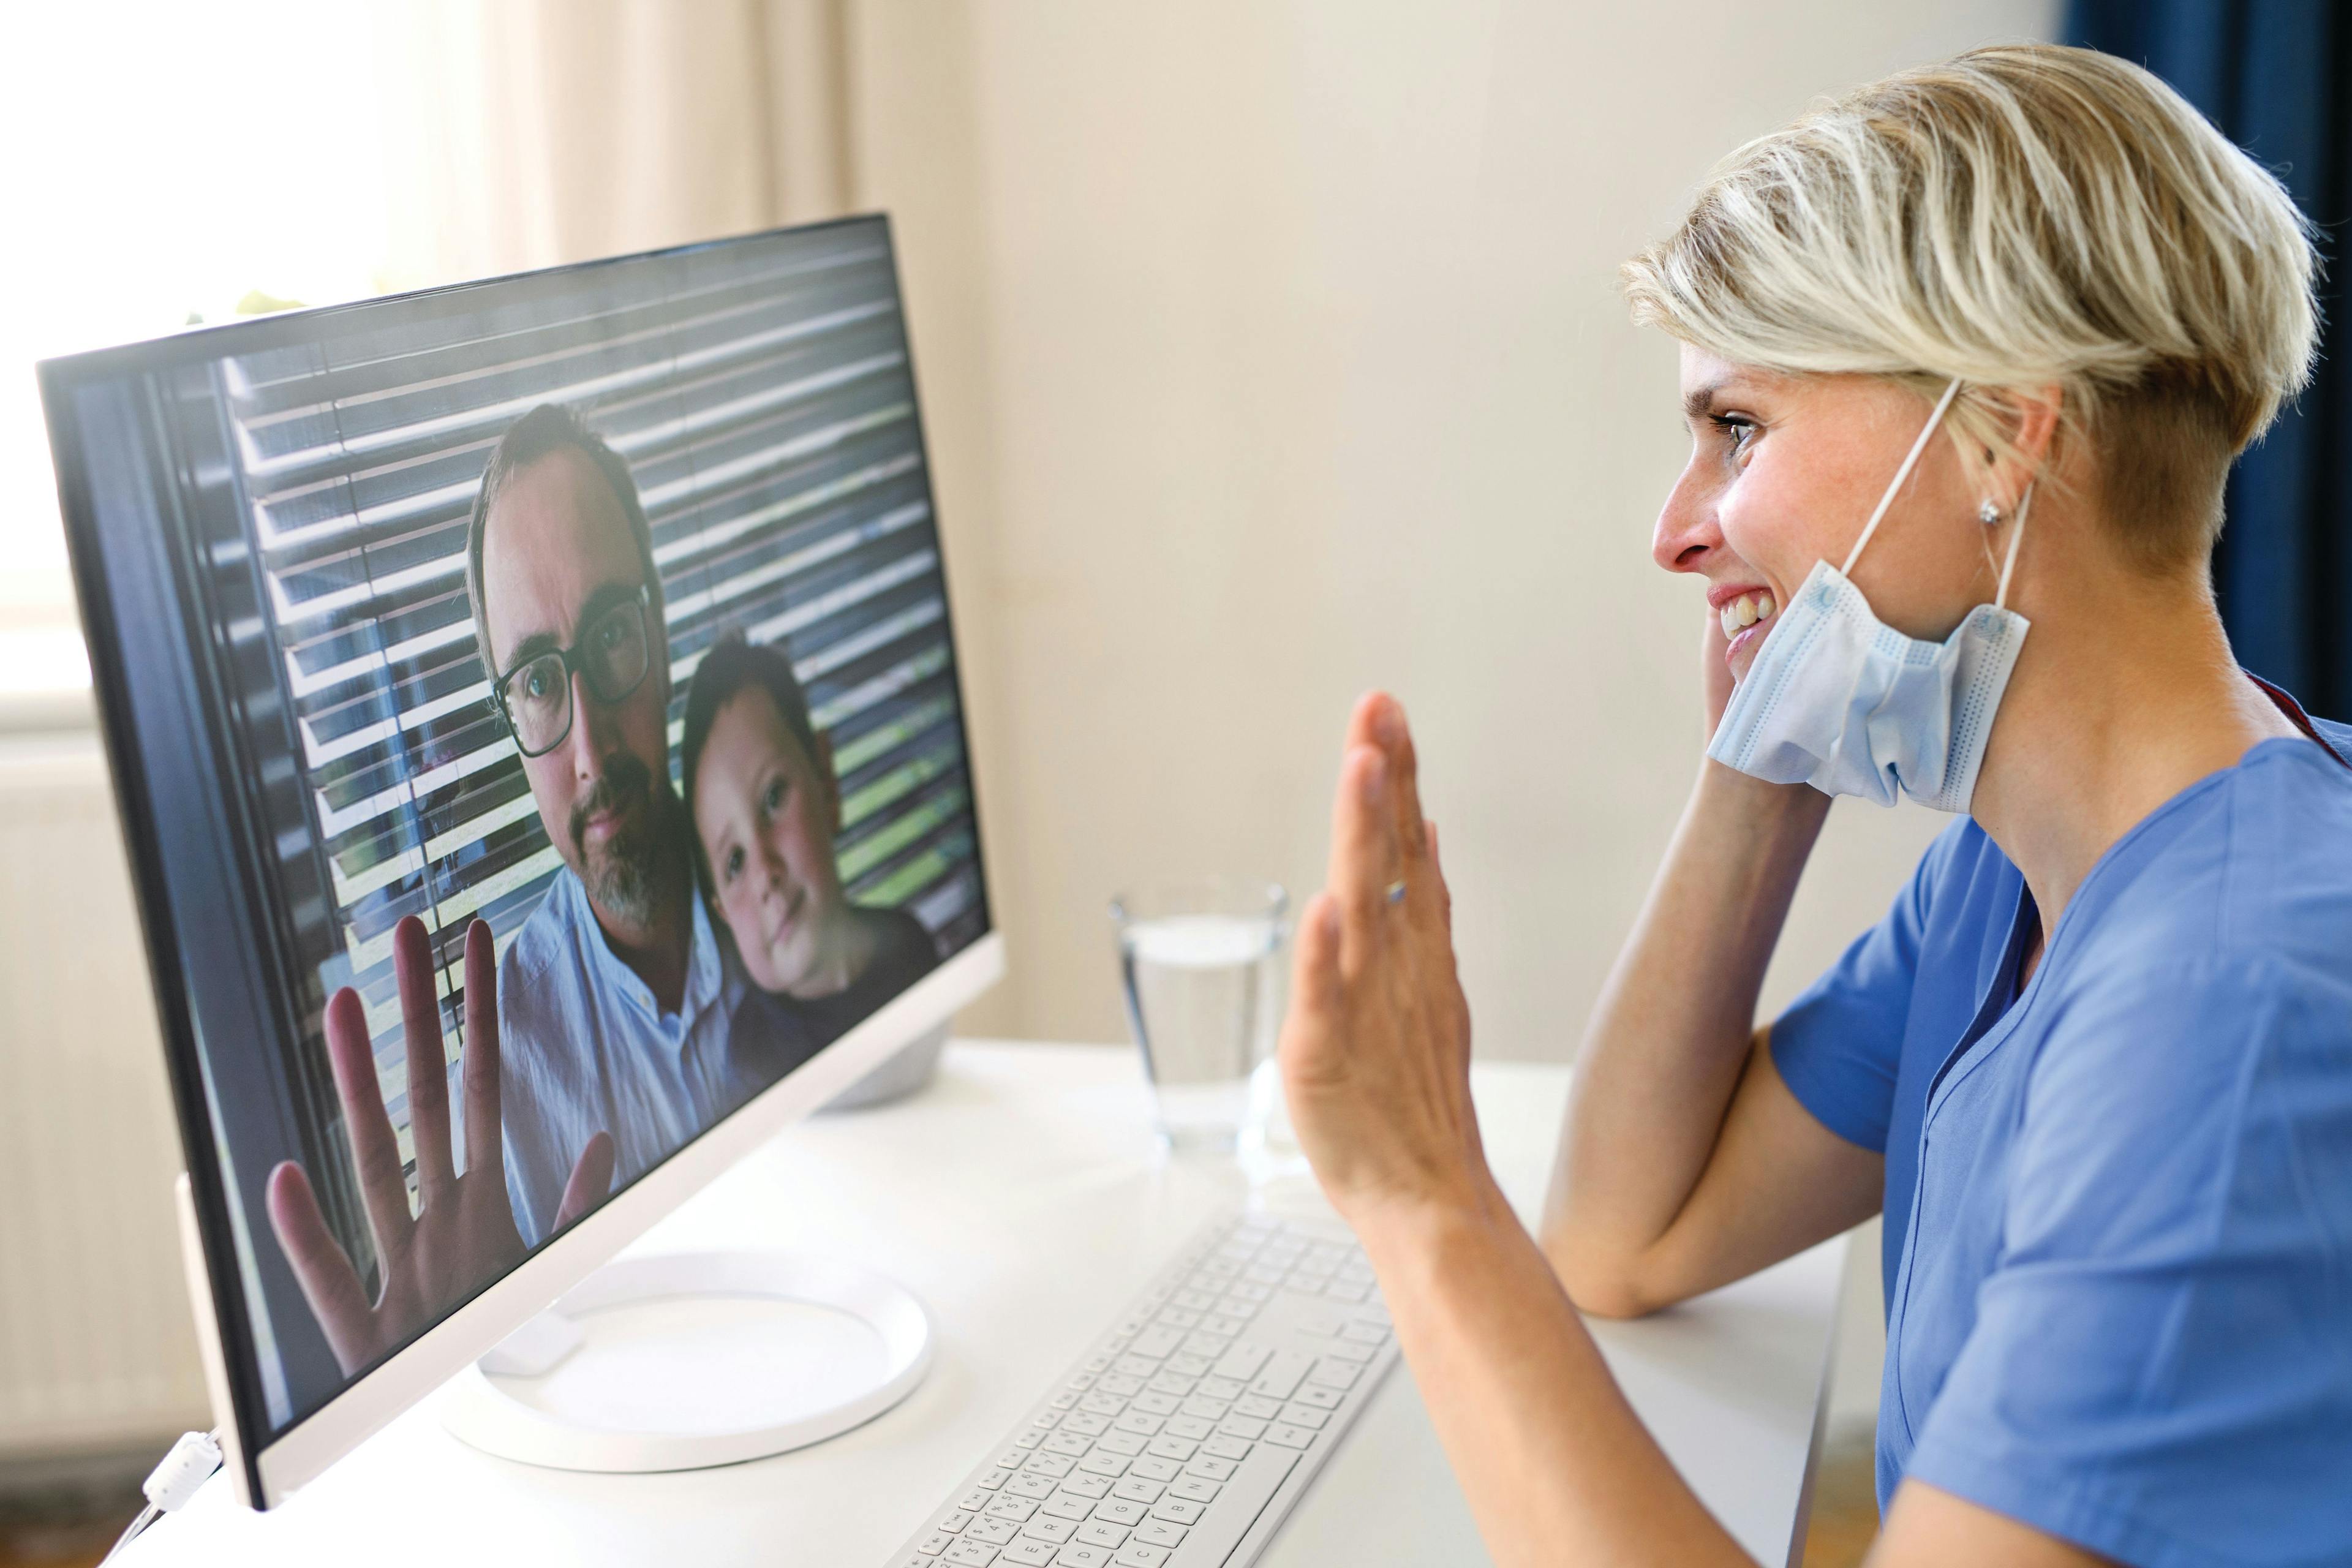 Teledentistry.com’s “Uber” Functionality Improves Patient Engagement, Retention